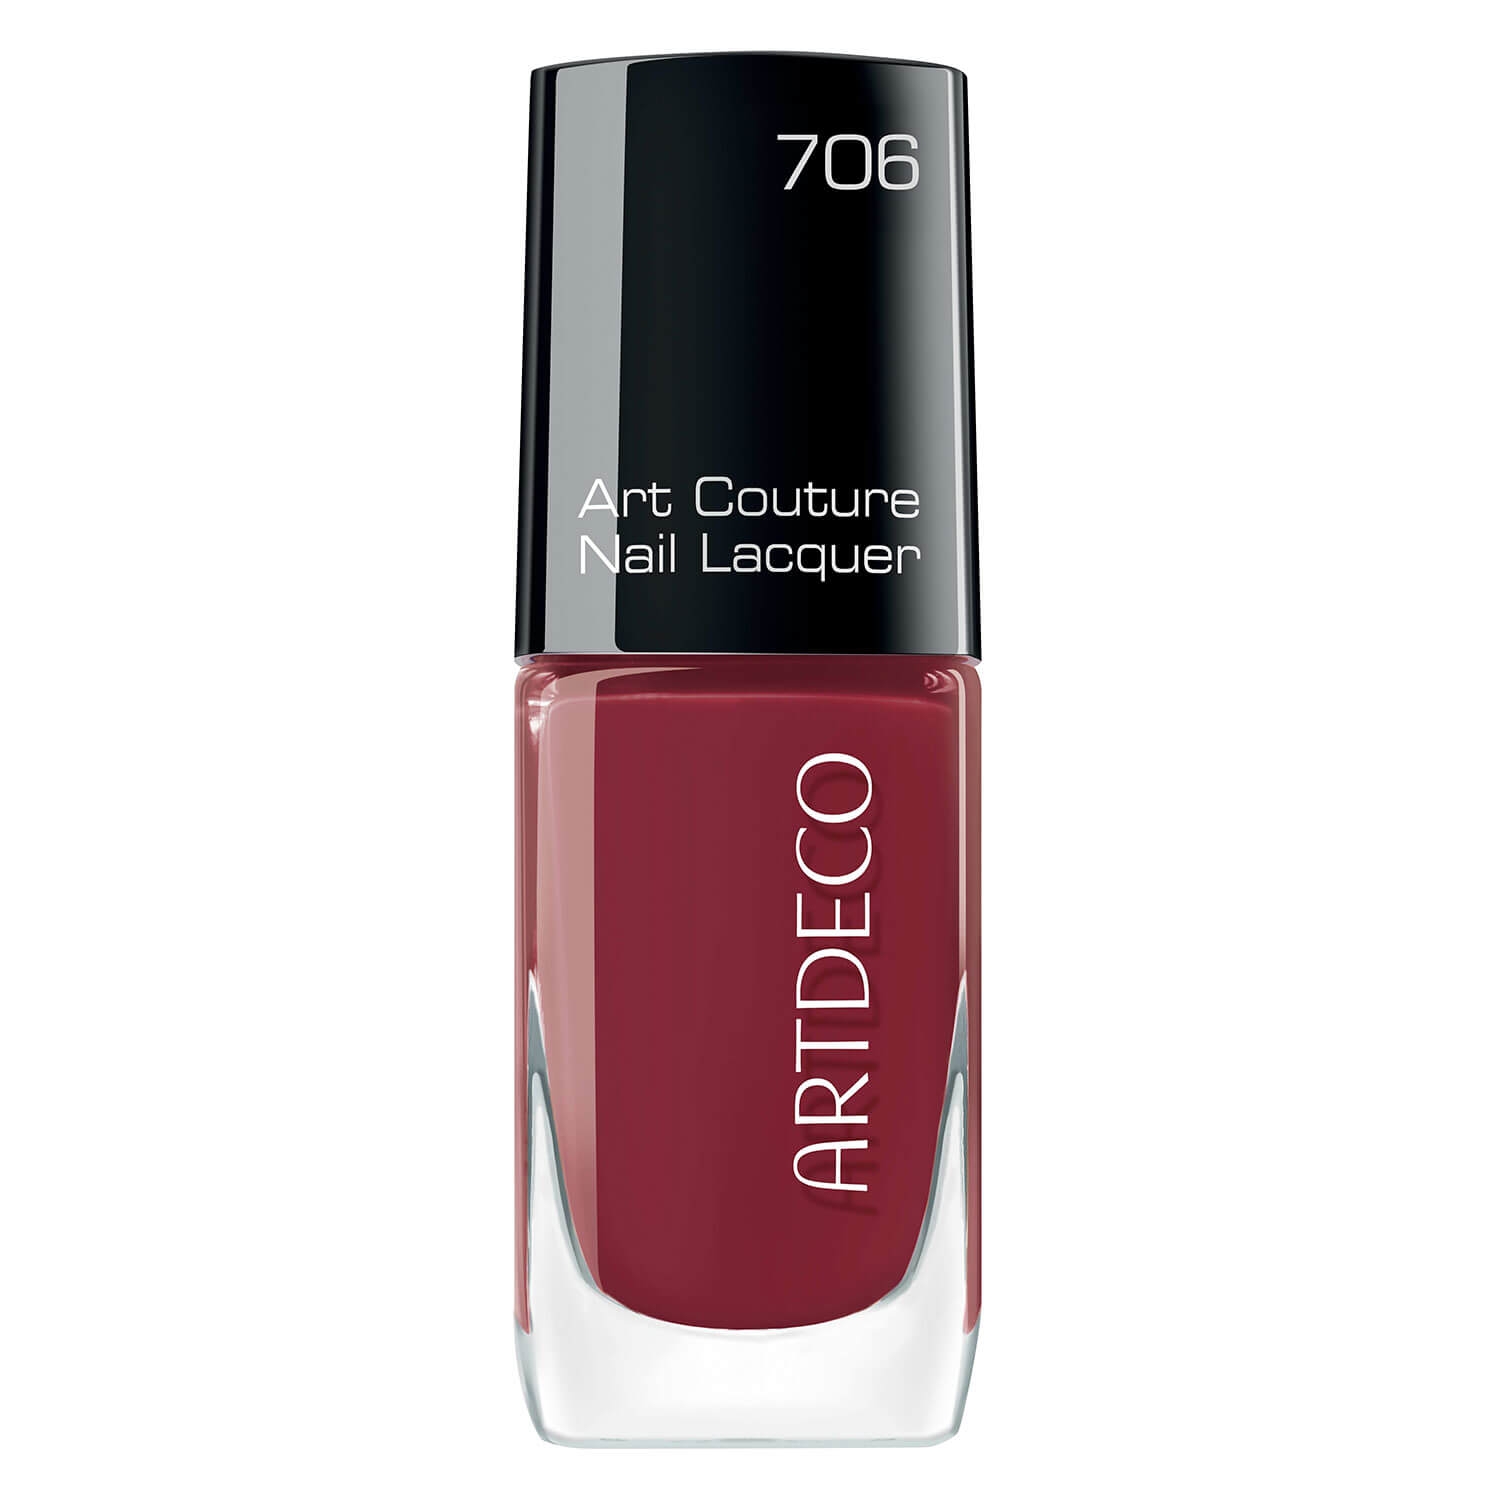 Produktbild von Beauty of Wilderness - Art Couture Nail Lacquer Tender Rose 706